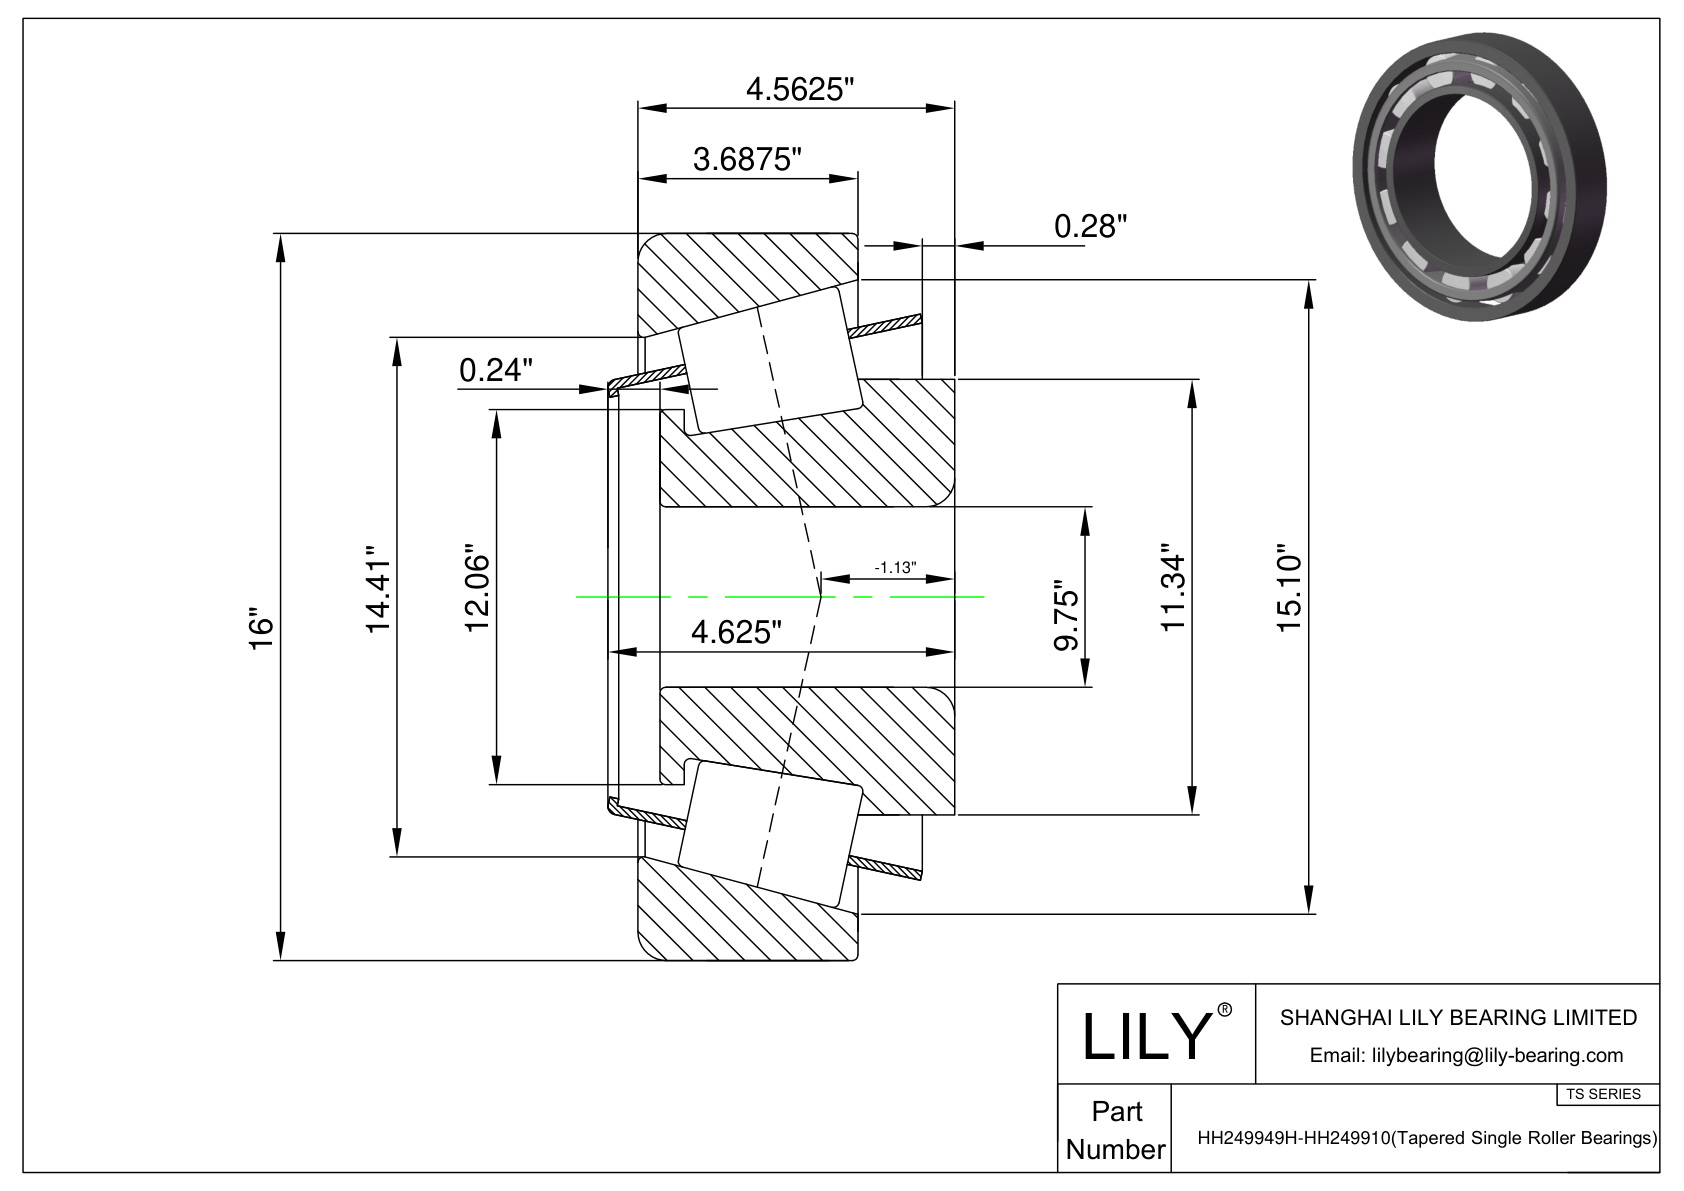 HH249949H-HH249910 TS (Tapered Single Roller Bearings) (Imperial) cad drawing